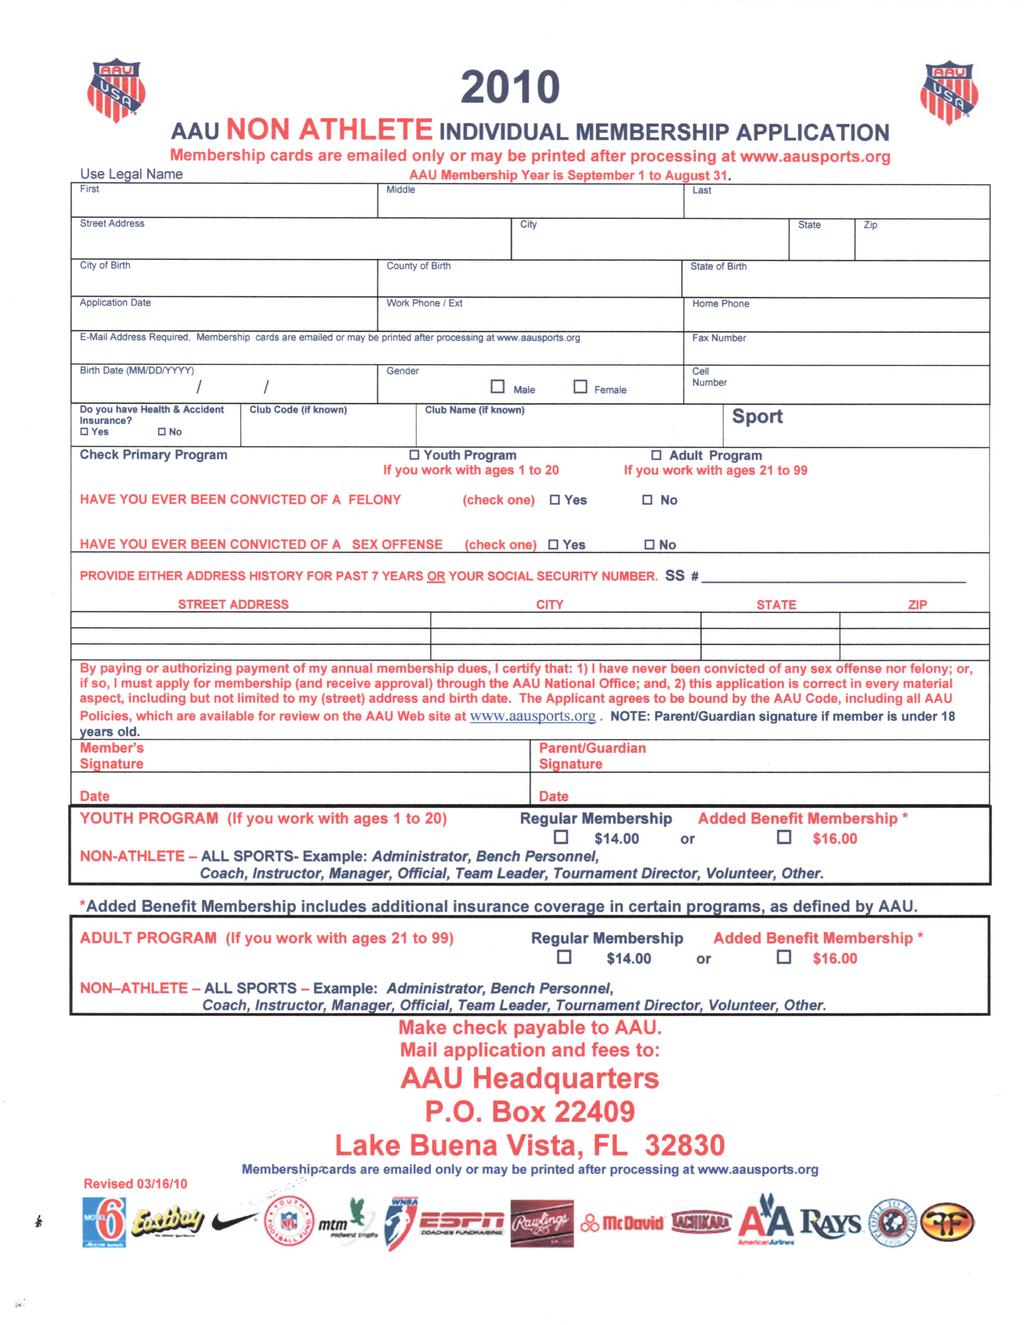 2010 AAU NON ATHLETE INDIVIDUAL MEMBERSHIP APPLICATION Membership cards are emailed only or may be printed after processing at www.aausports.